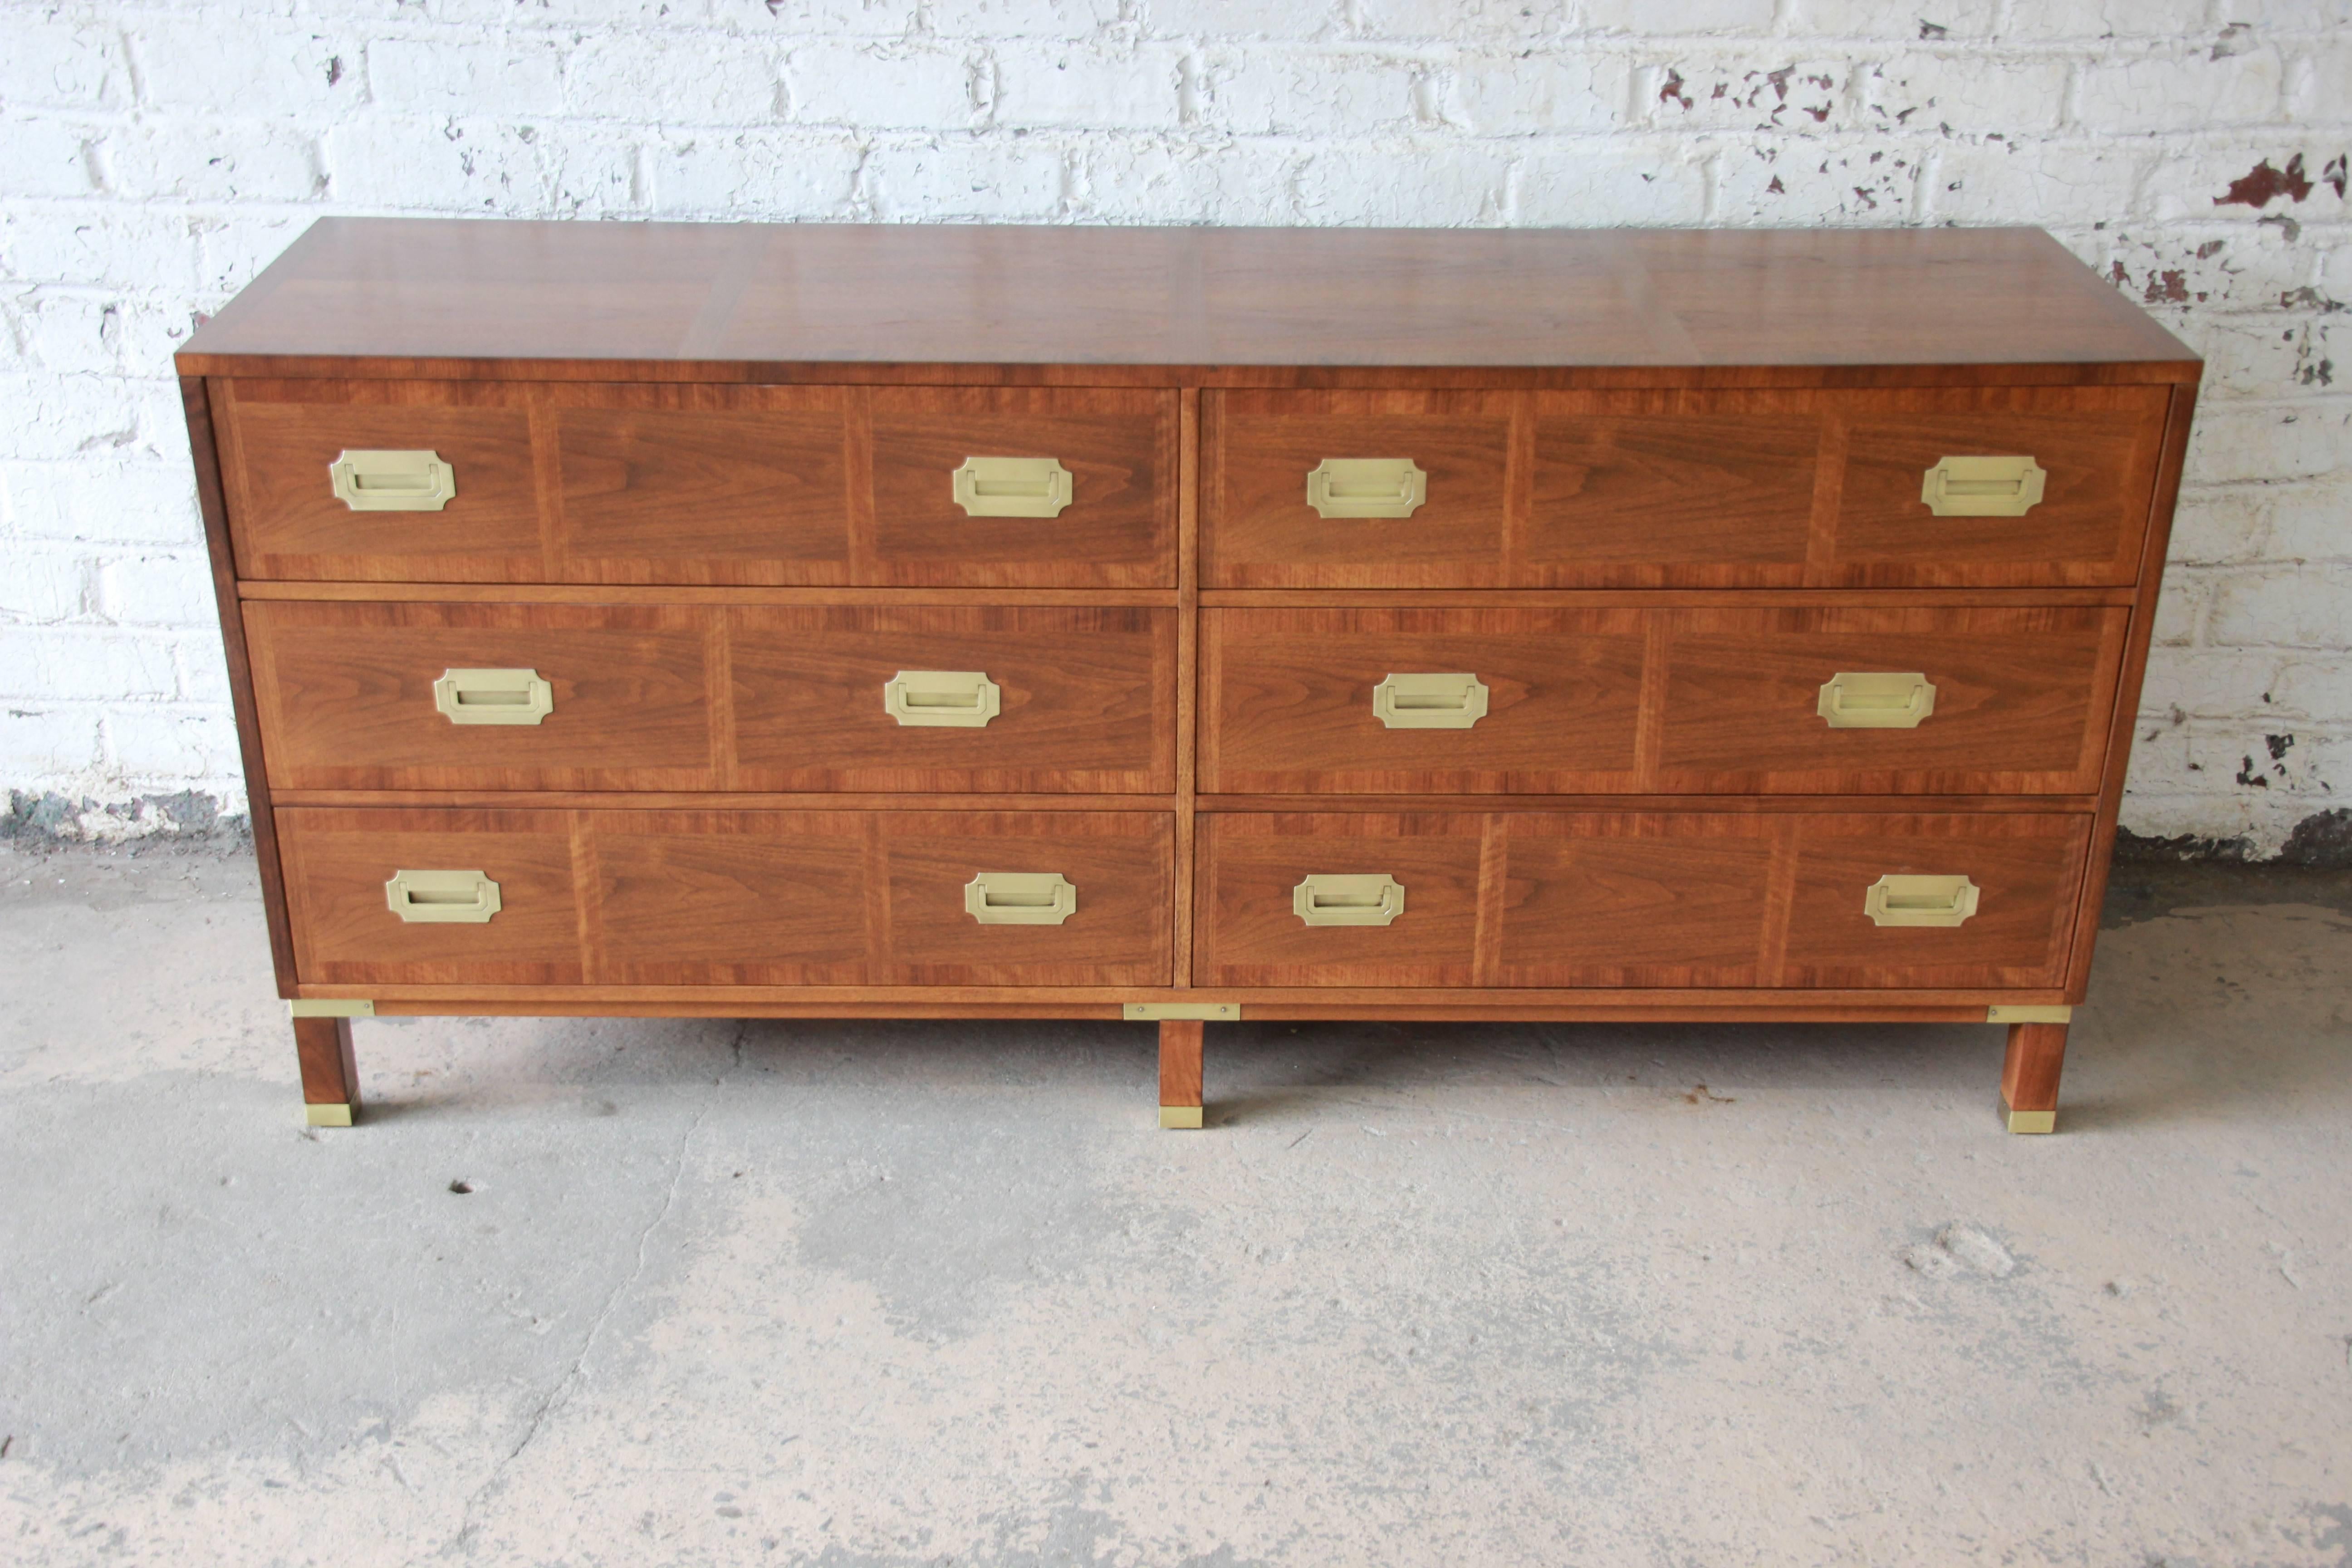 A stunning newly refinished midcentury Hollywood Regency Campaign style dresser or credenza from the Milling Road line by Baker Furniture. The dresser features rich walnut wood grain with a banded edge and beautiful polished brass hardware and